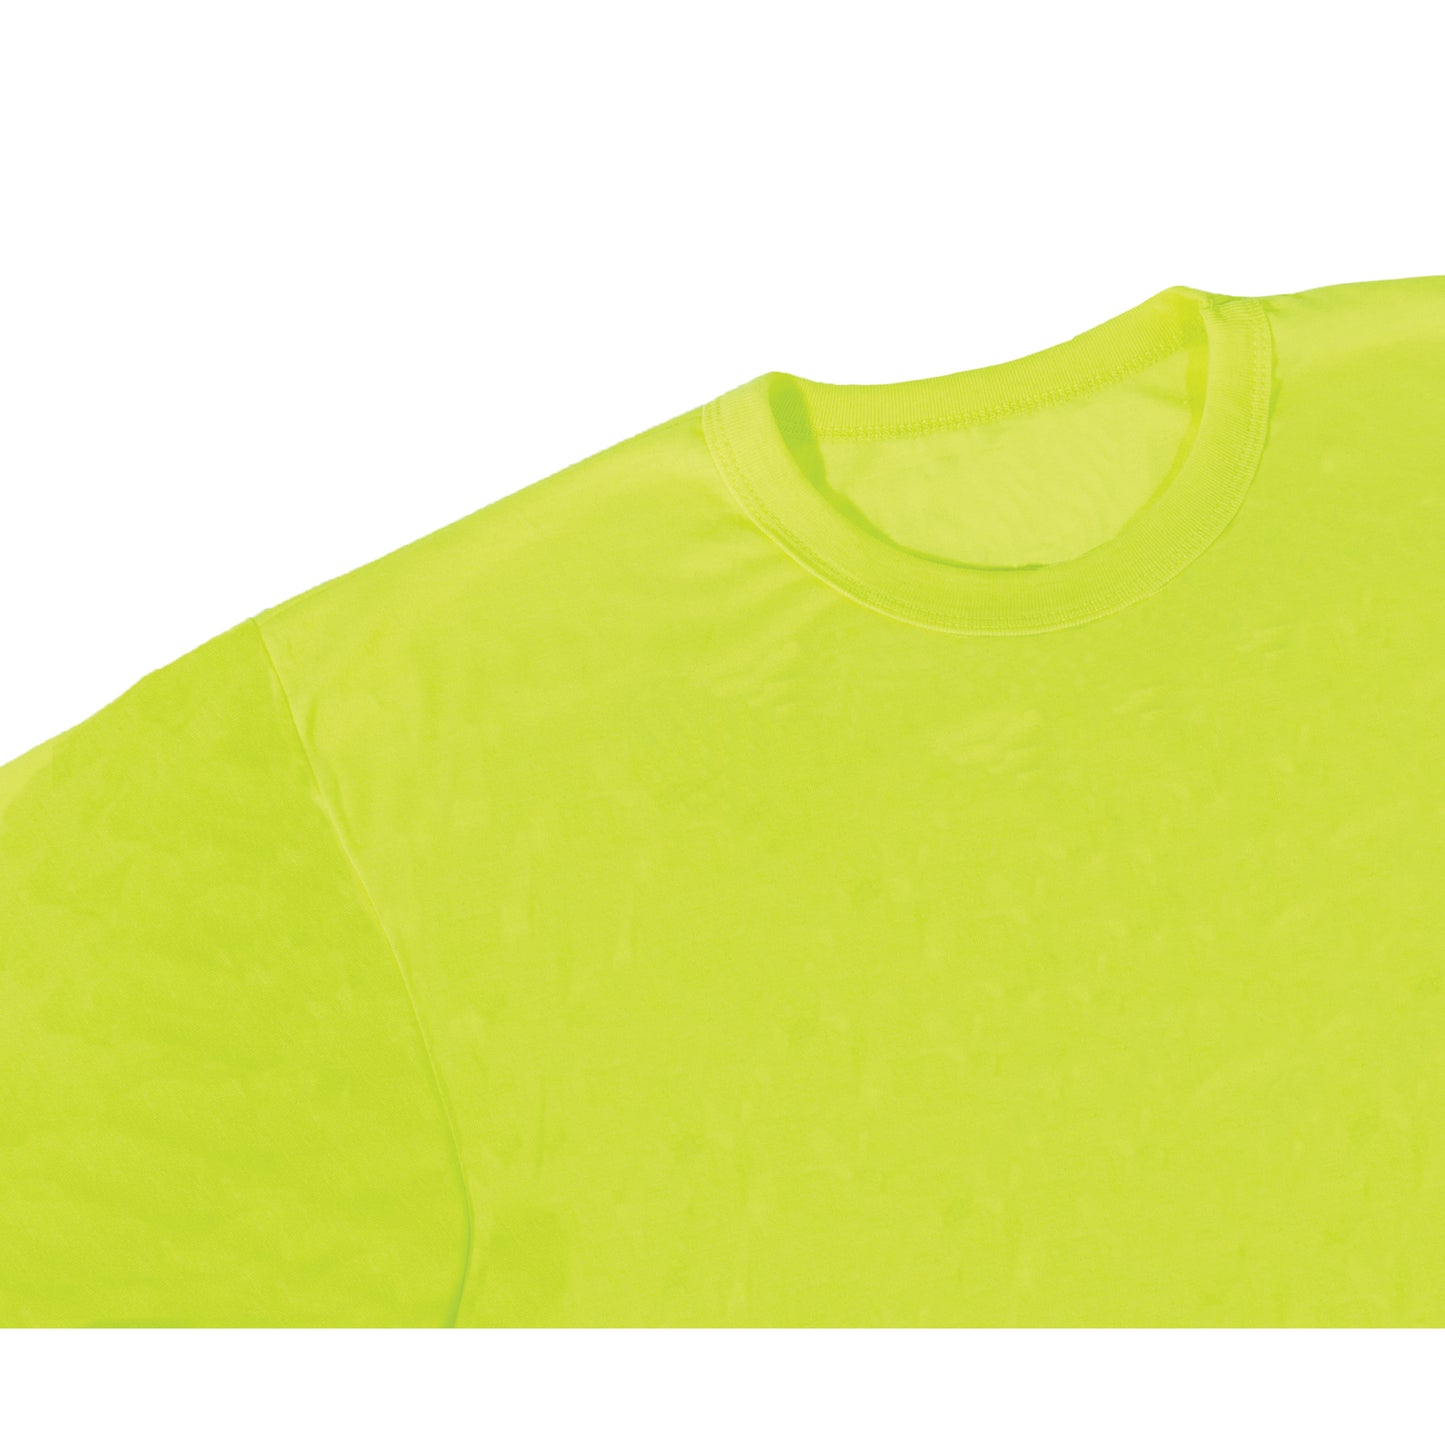 Rothco Moisture Wicking Long Sleeve Pocket T-Shirt - Safety Green